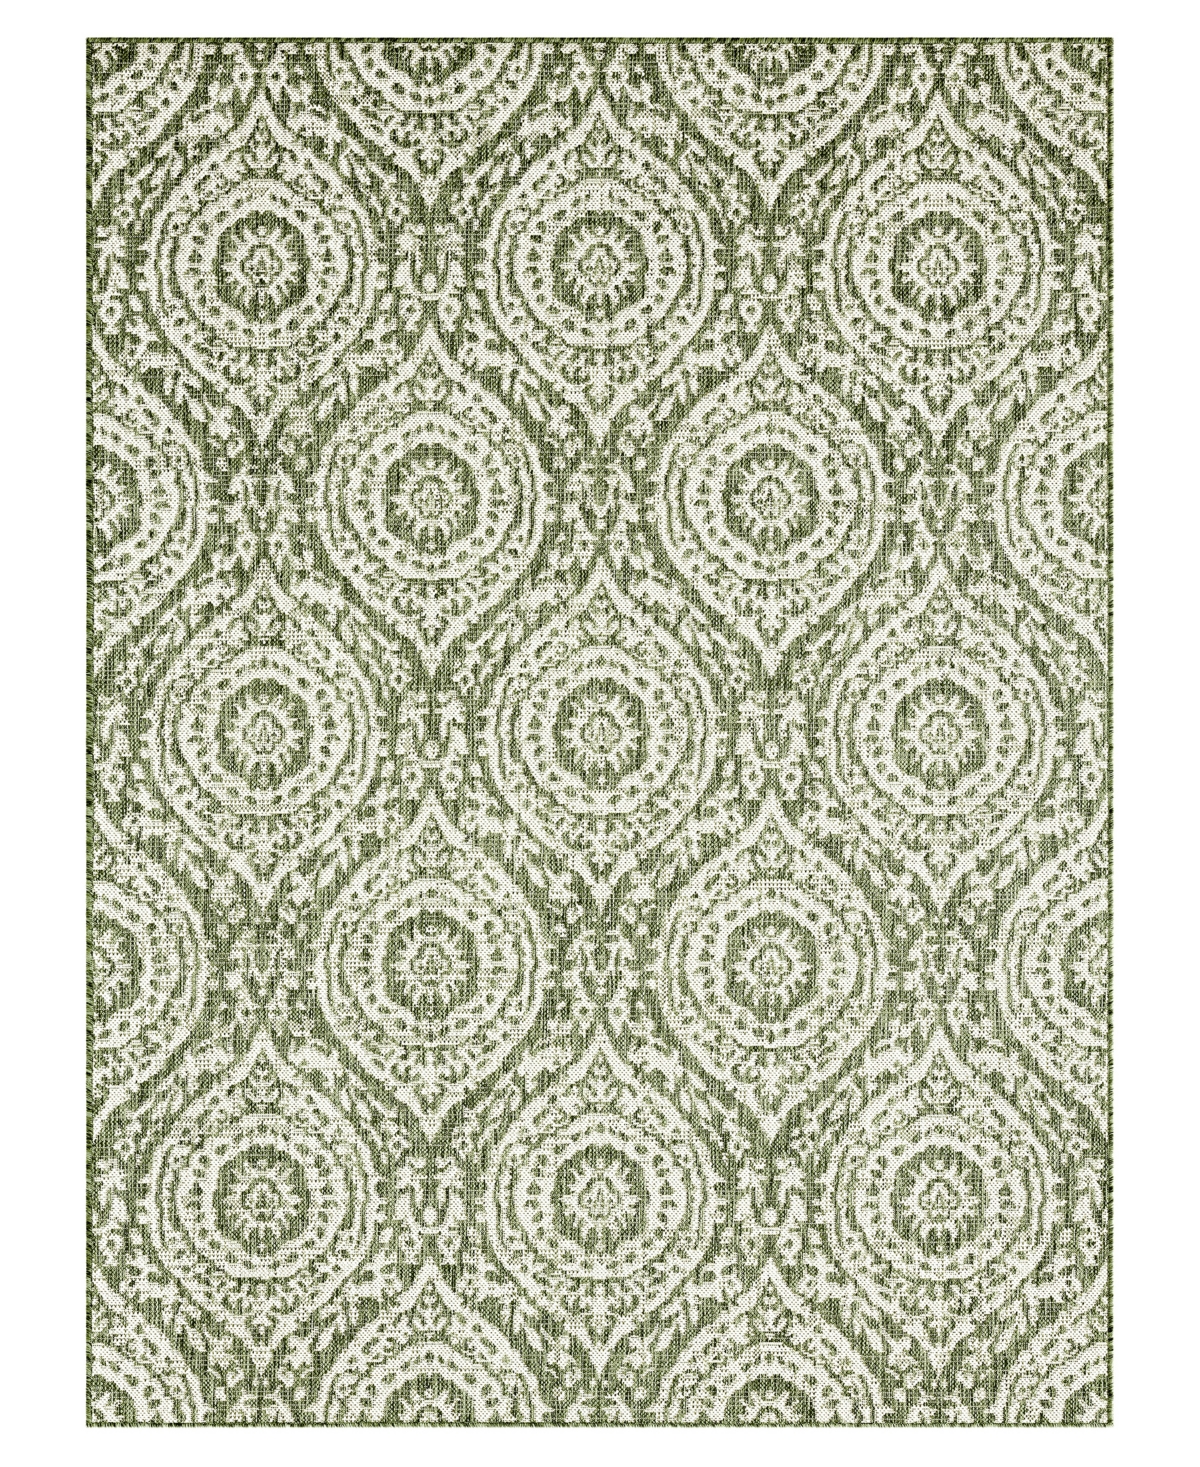 Nicole Miller Patio Country Zoe 5'2" X 7'2" Area Rug In Olive